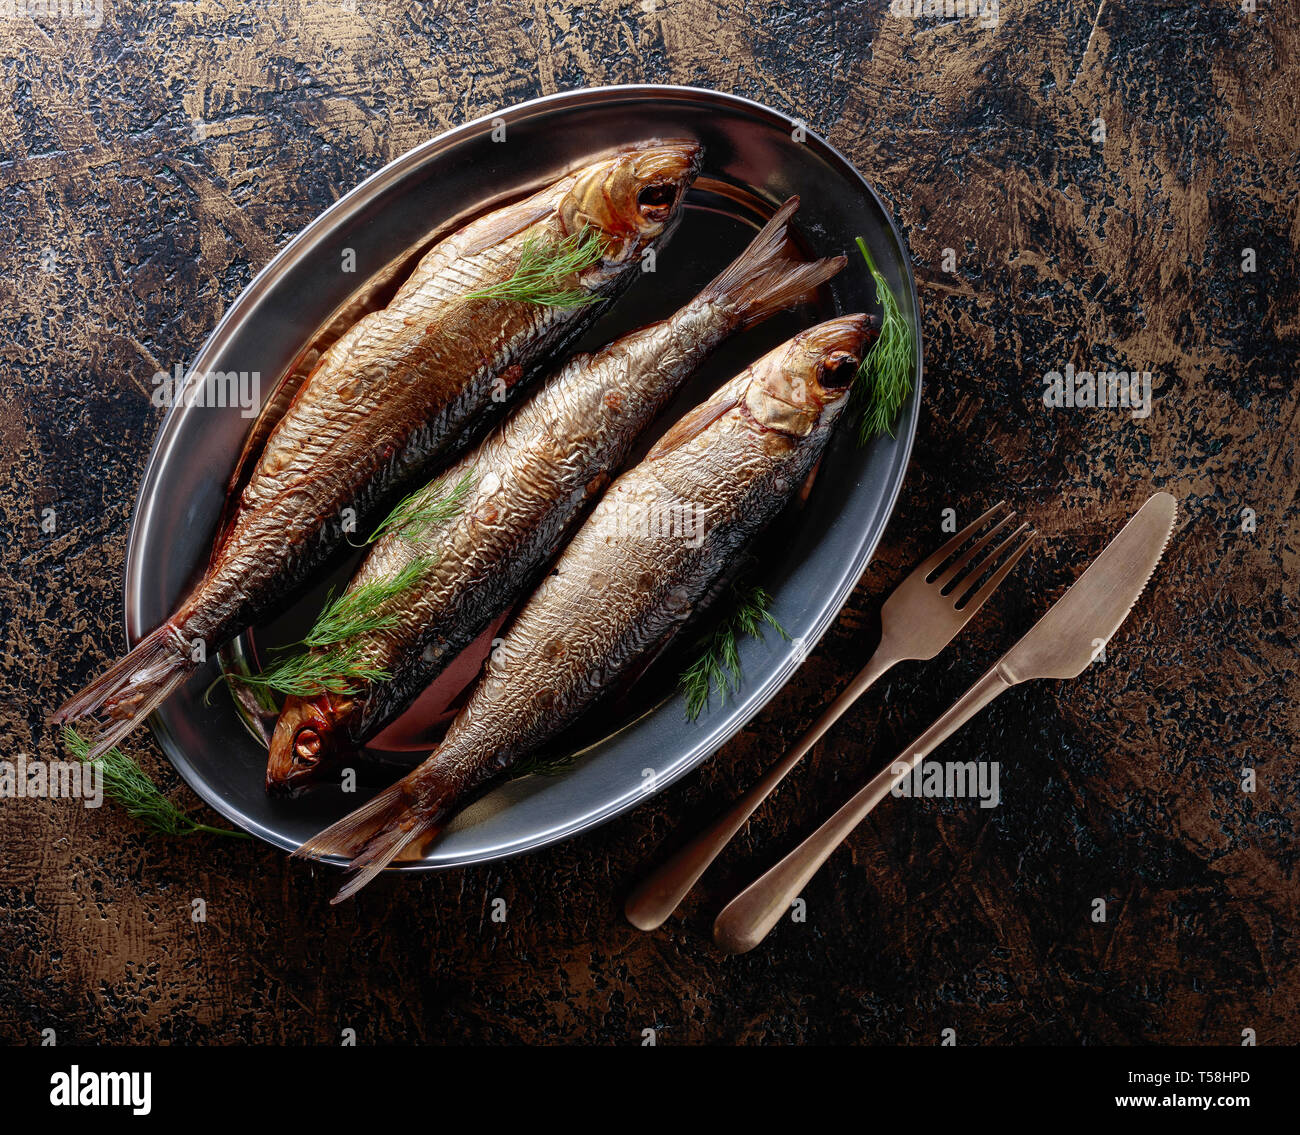 Surstromming Fermented baltic herring a Swedish delicacy Stockholms Lan  Sweden August 2008 Stock Photo - Alamy